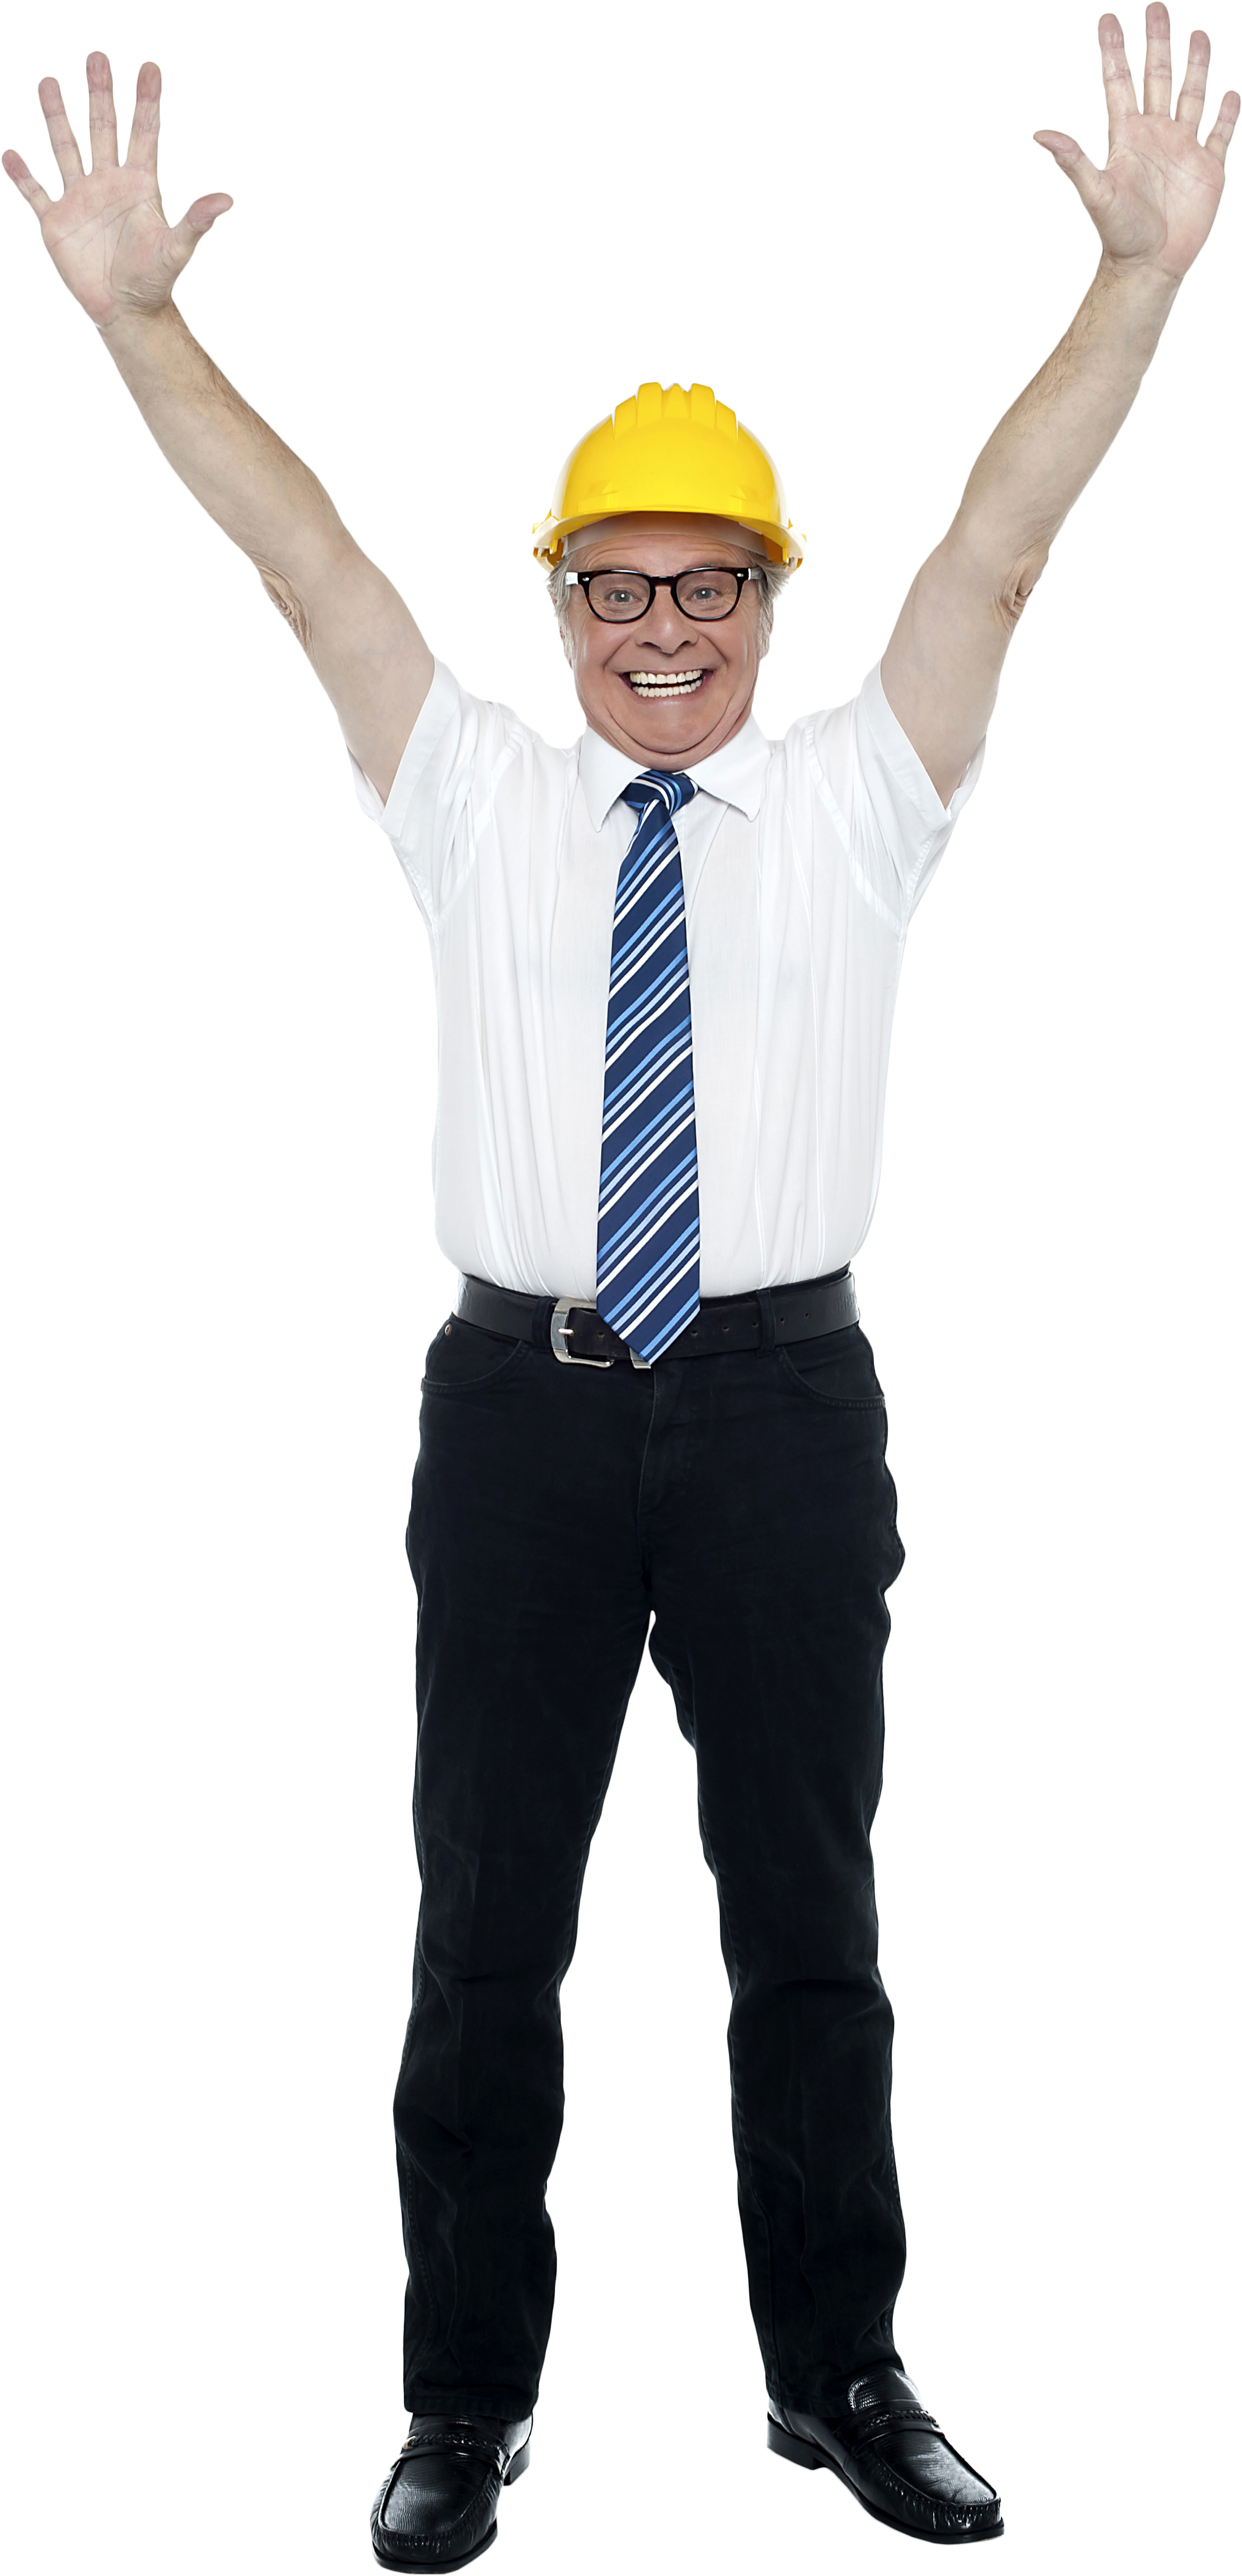 A Man In A Tie And Tie Holding His Hands Up